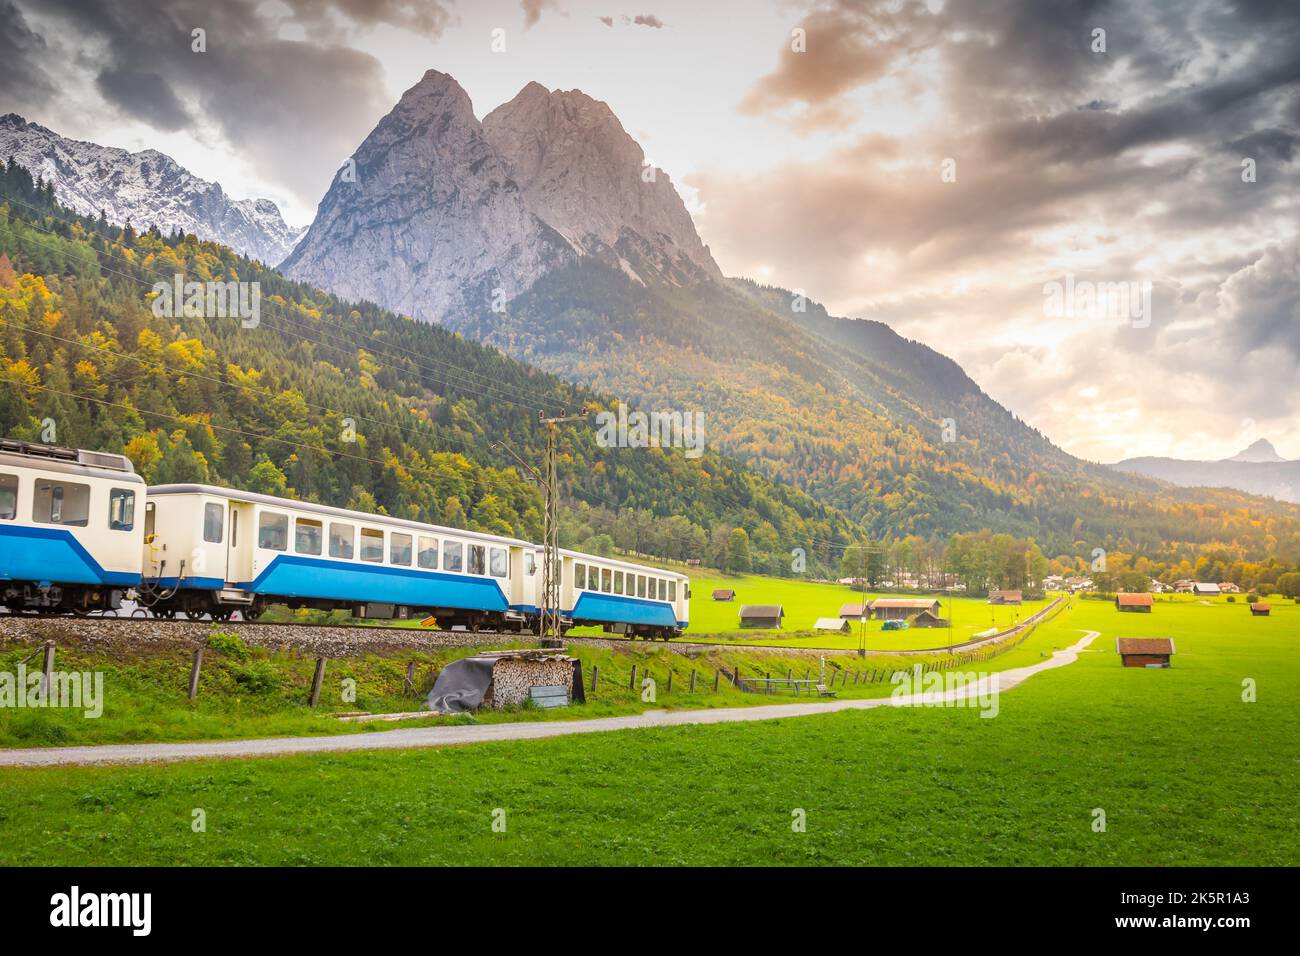 Train in Bavarian alps at autumn and wooden barns at sunset, Garmisch, Germany Stock Photo